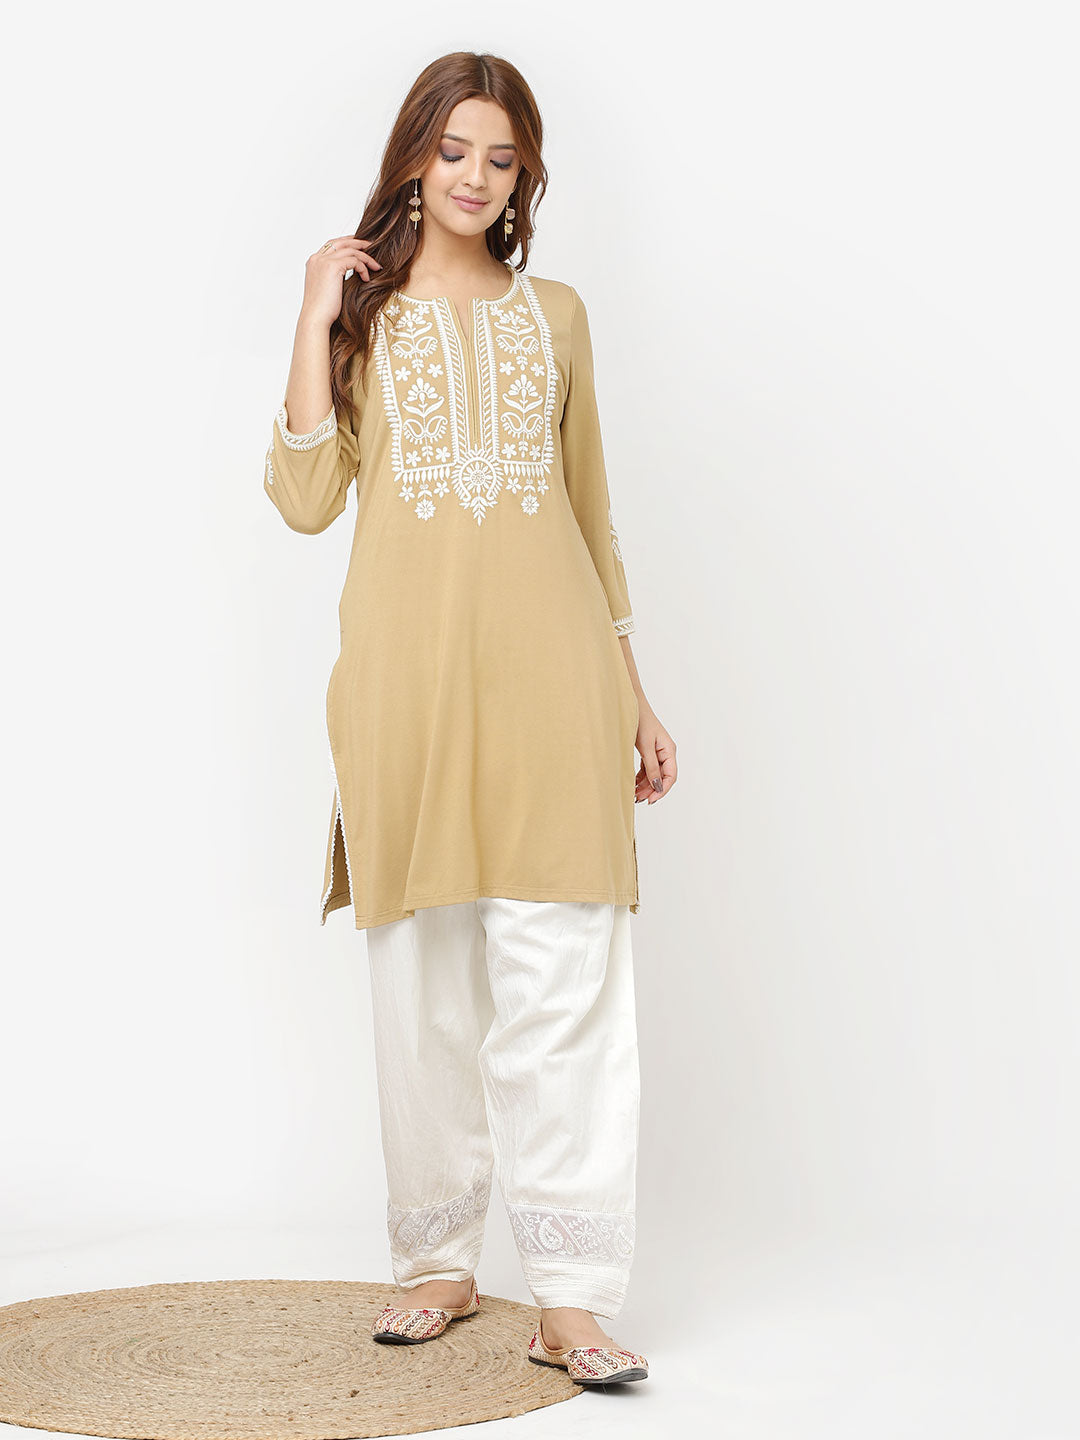 Buy SARSWAL Traders Women's Rayon Kurti and Pent with Net Shrug White at  Amazon.in